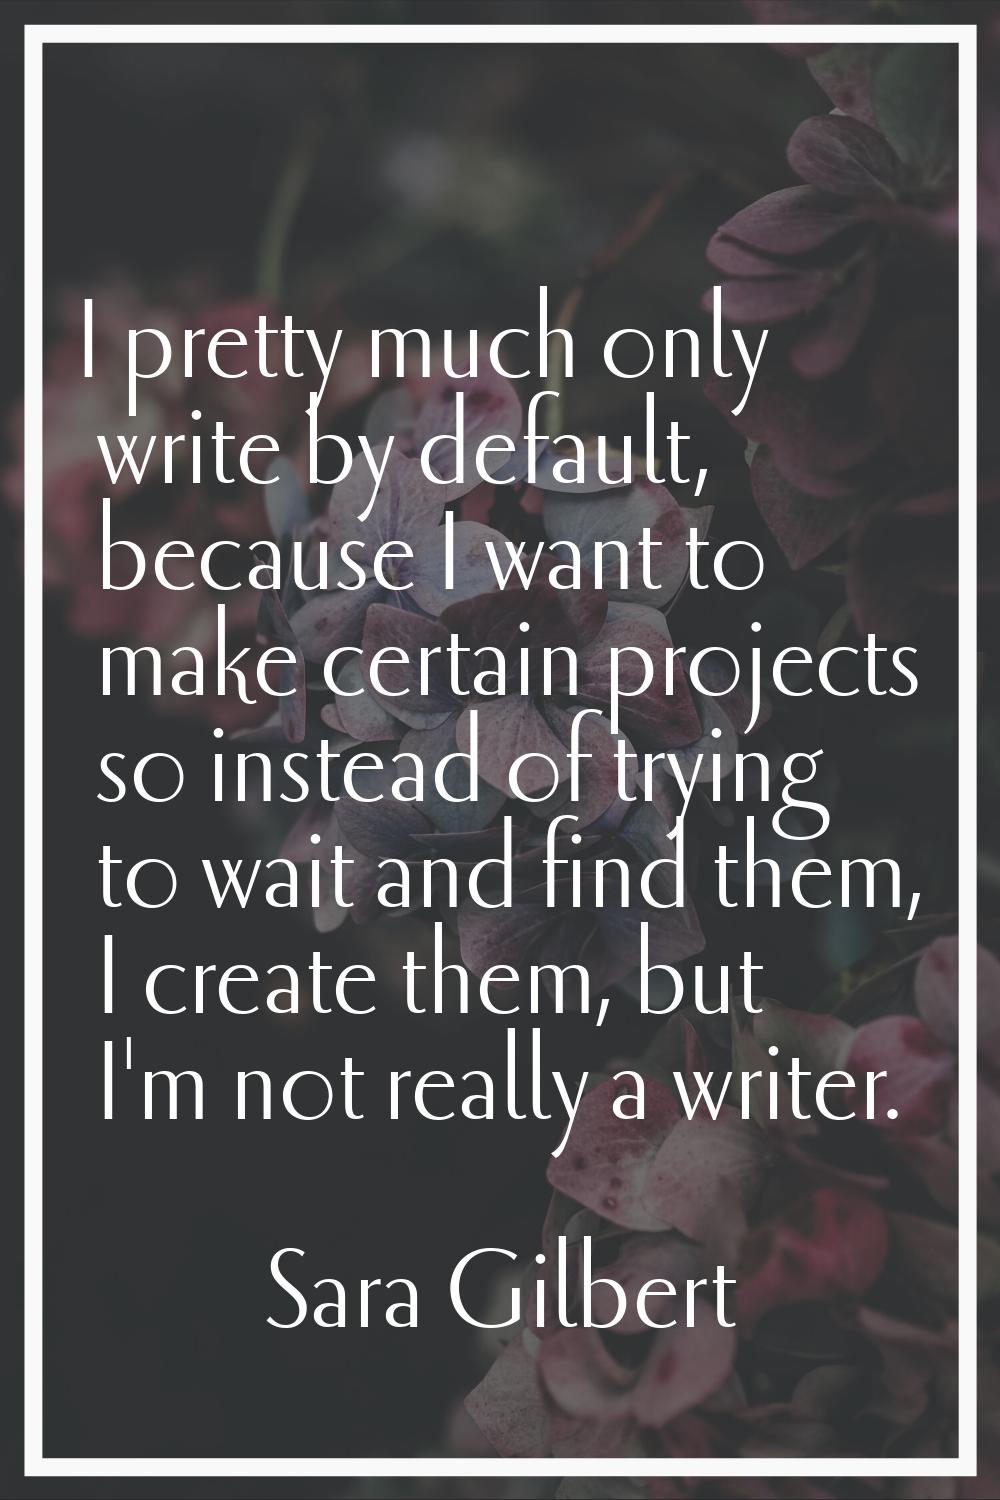 I pretty much only write by default, because I want to make certain projects so instead of trying t